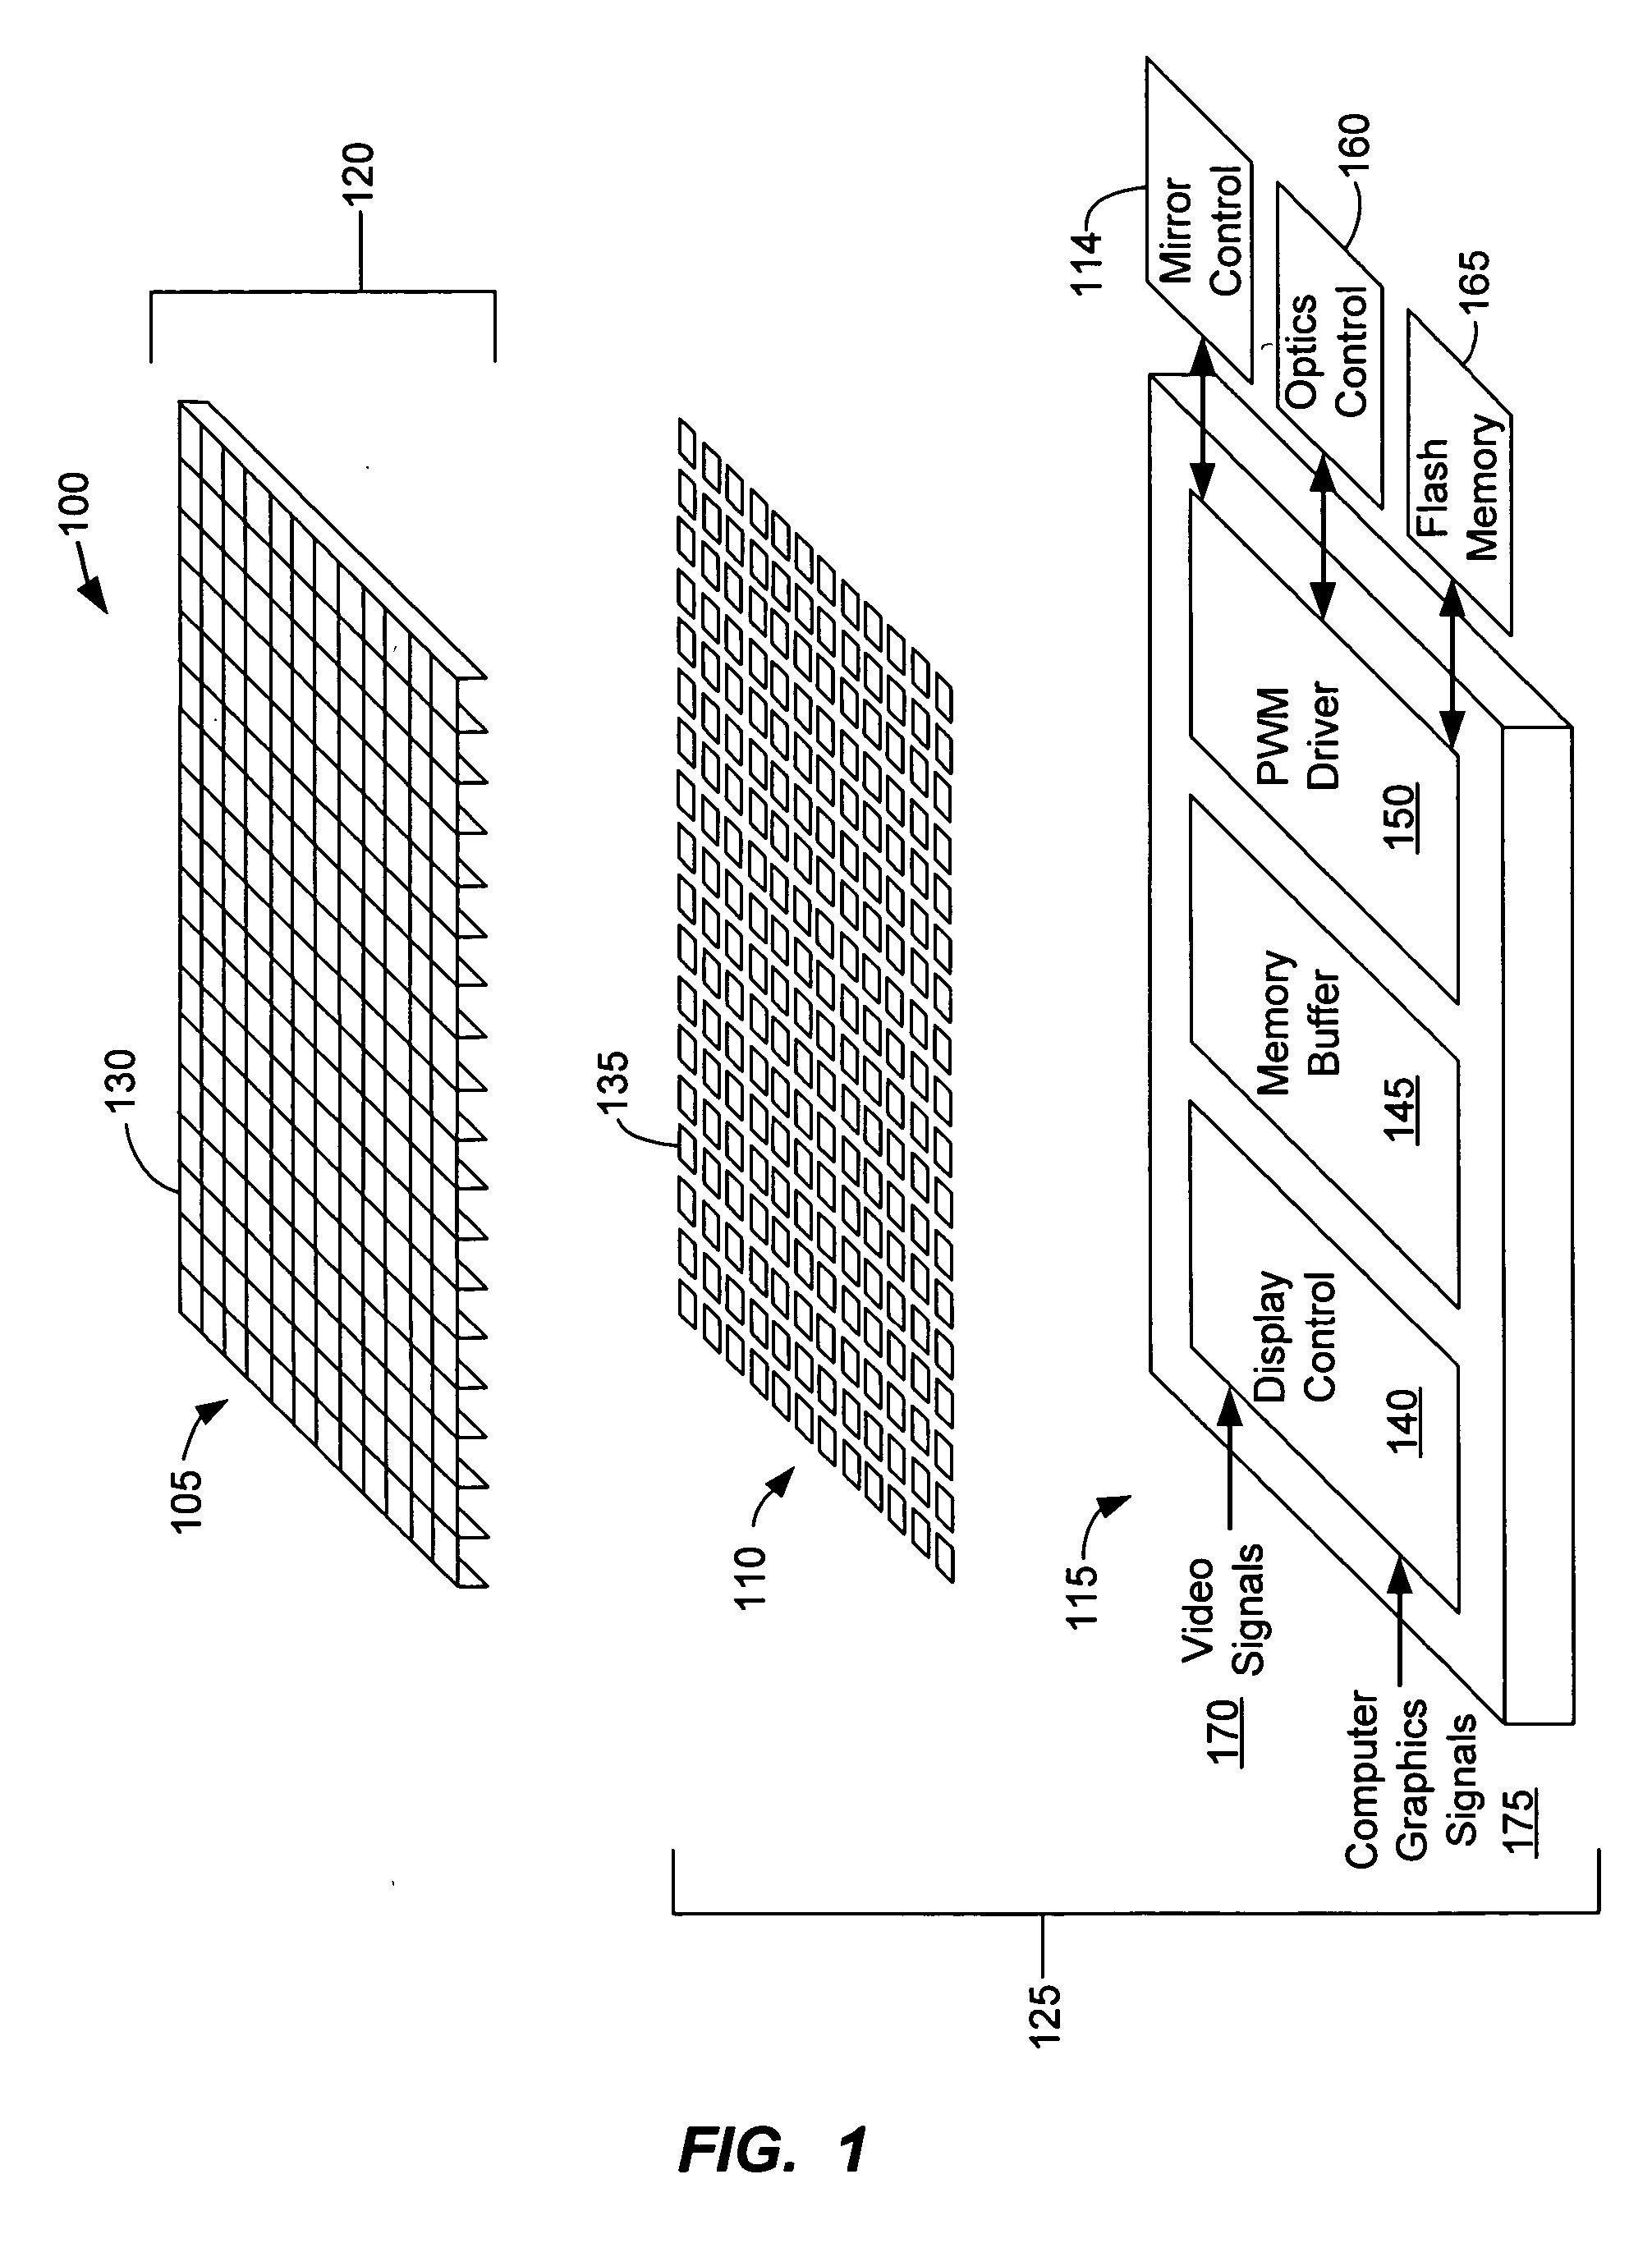 Mirror structure with single crystal silicon cross-member